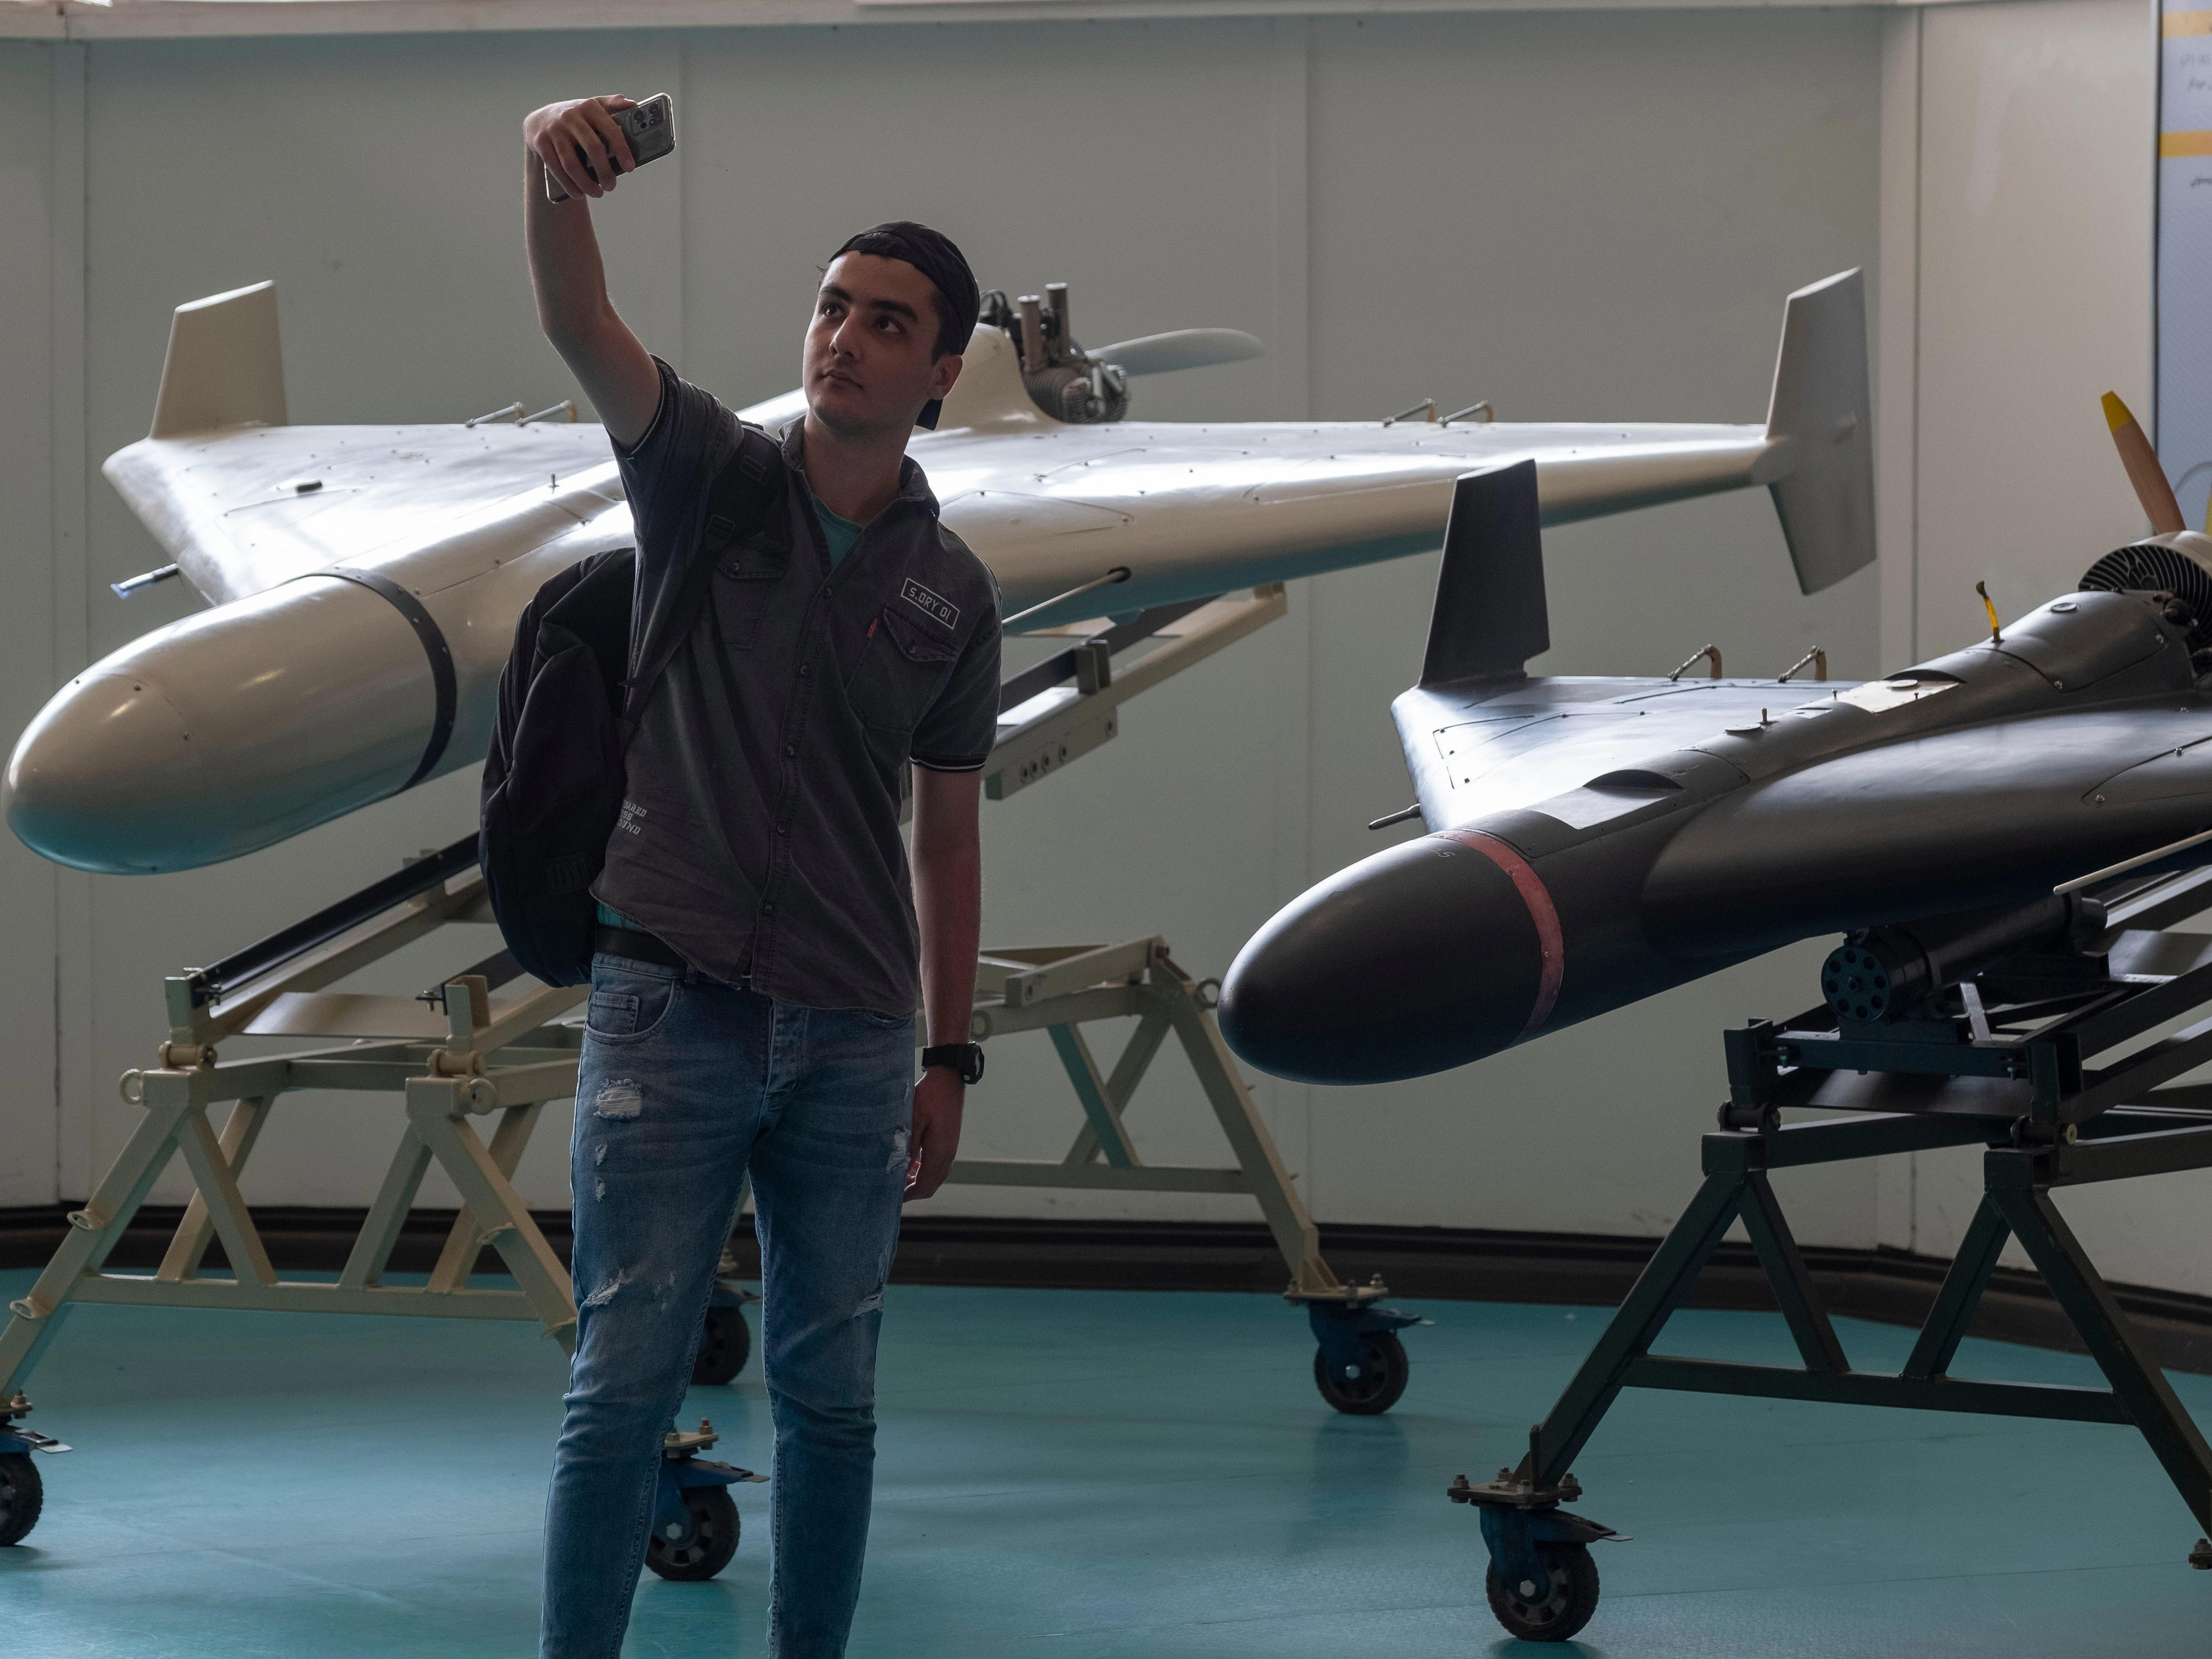 microsoft, iran's stealth drones have become the new blueprint for international warfare